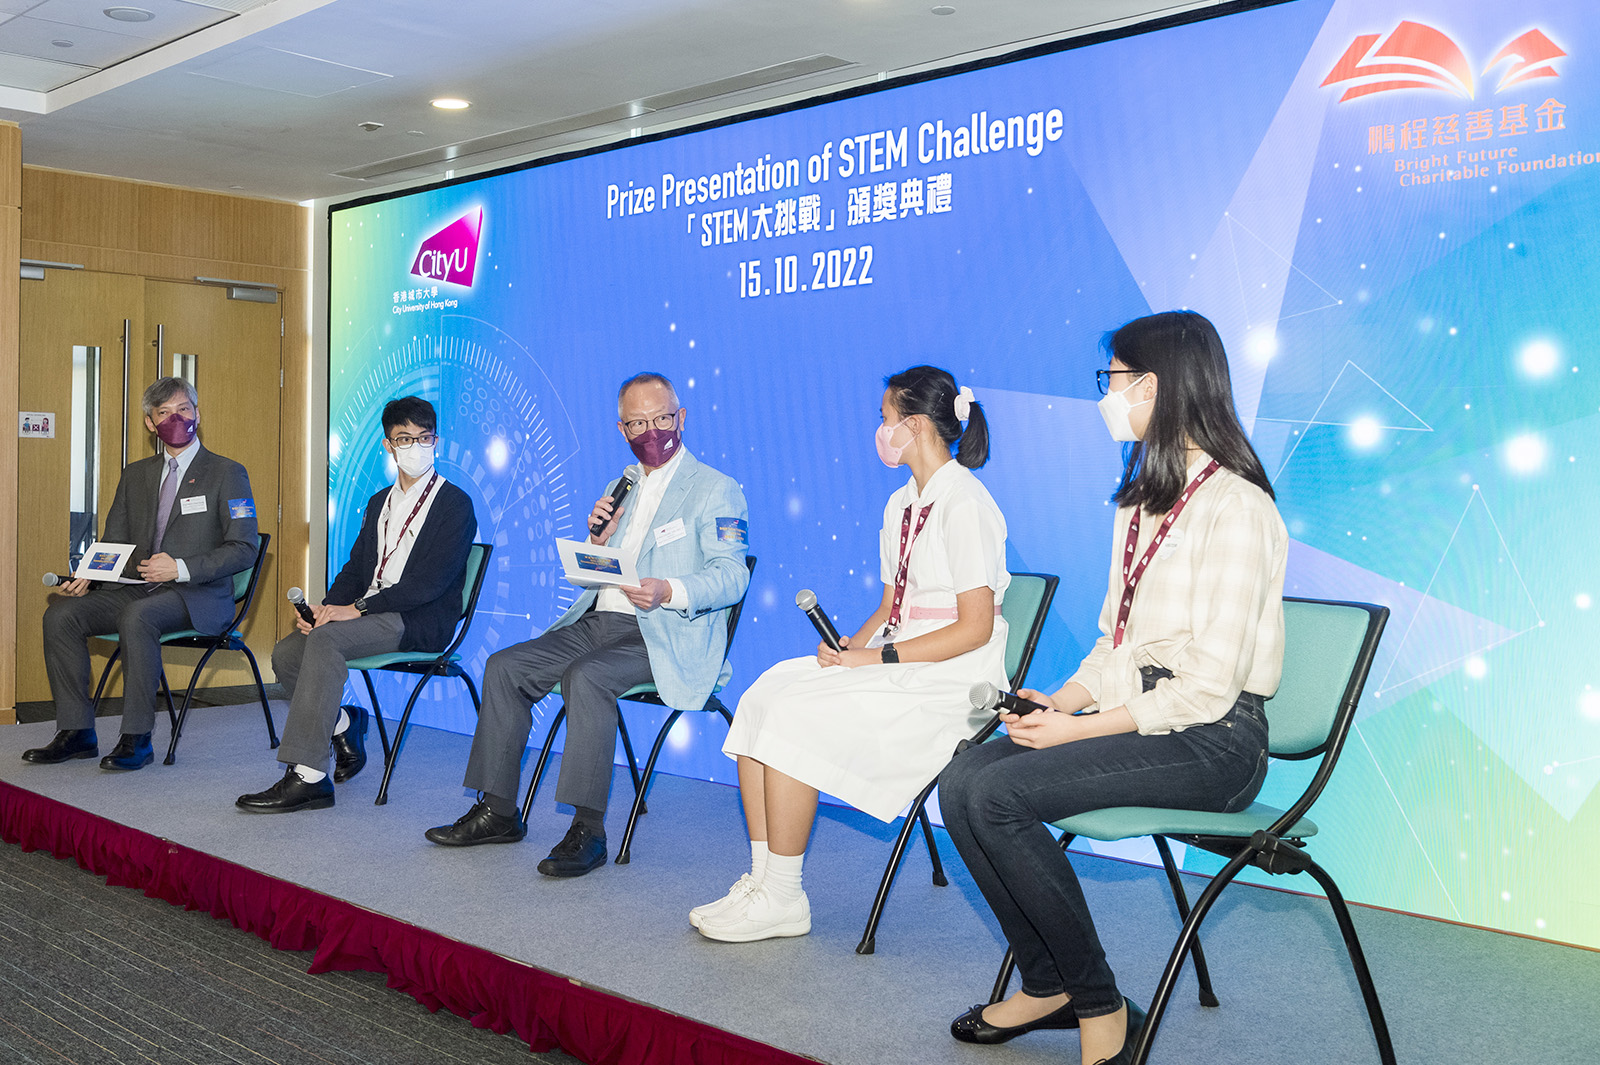 Dr Roy Chung joined the sharing session with the representatives of the three winning teams of the STEM Challenge and shared his inspiring words.